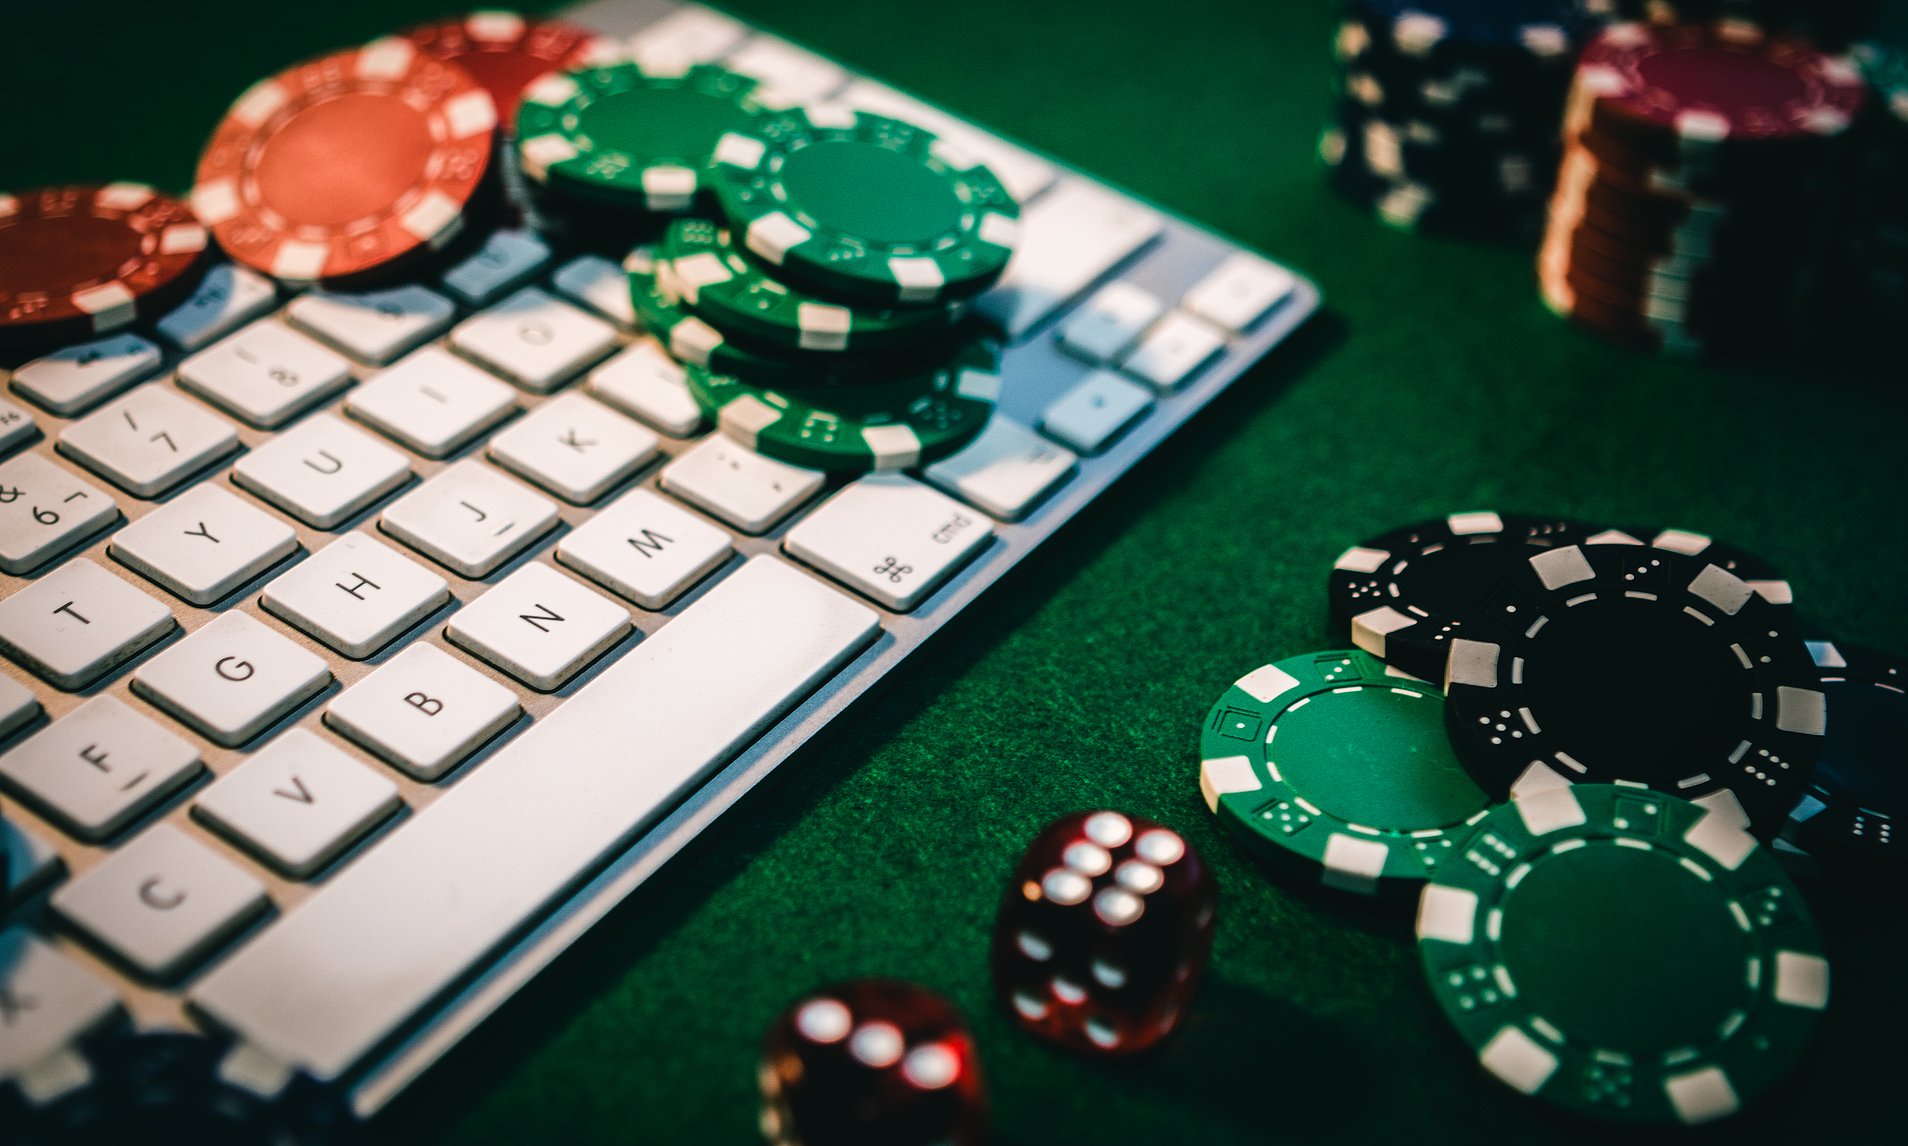 Essential information that you need to know about online casinos! Here are the details!